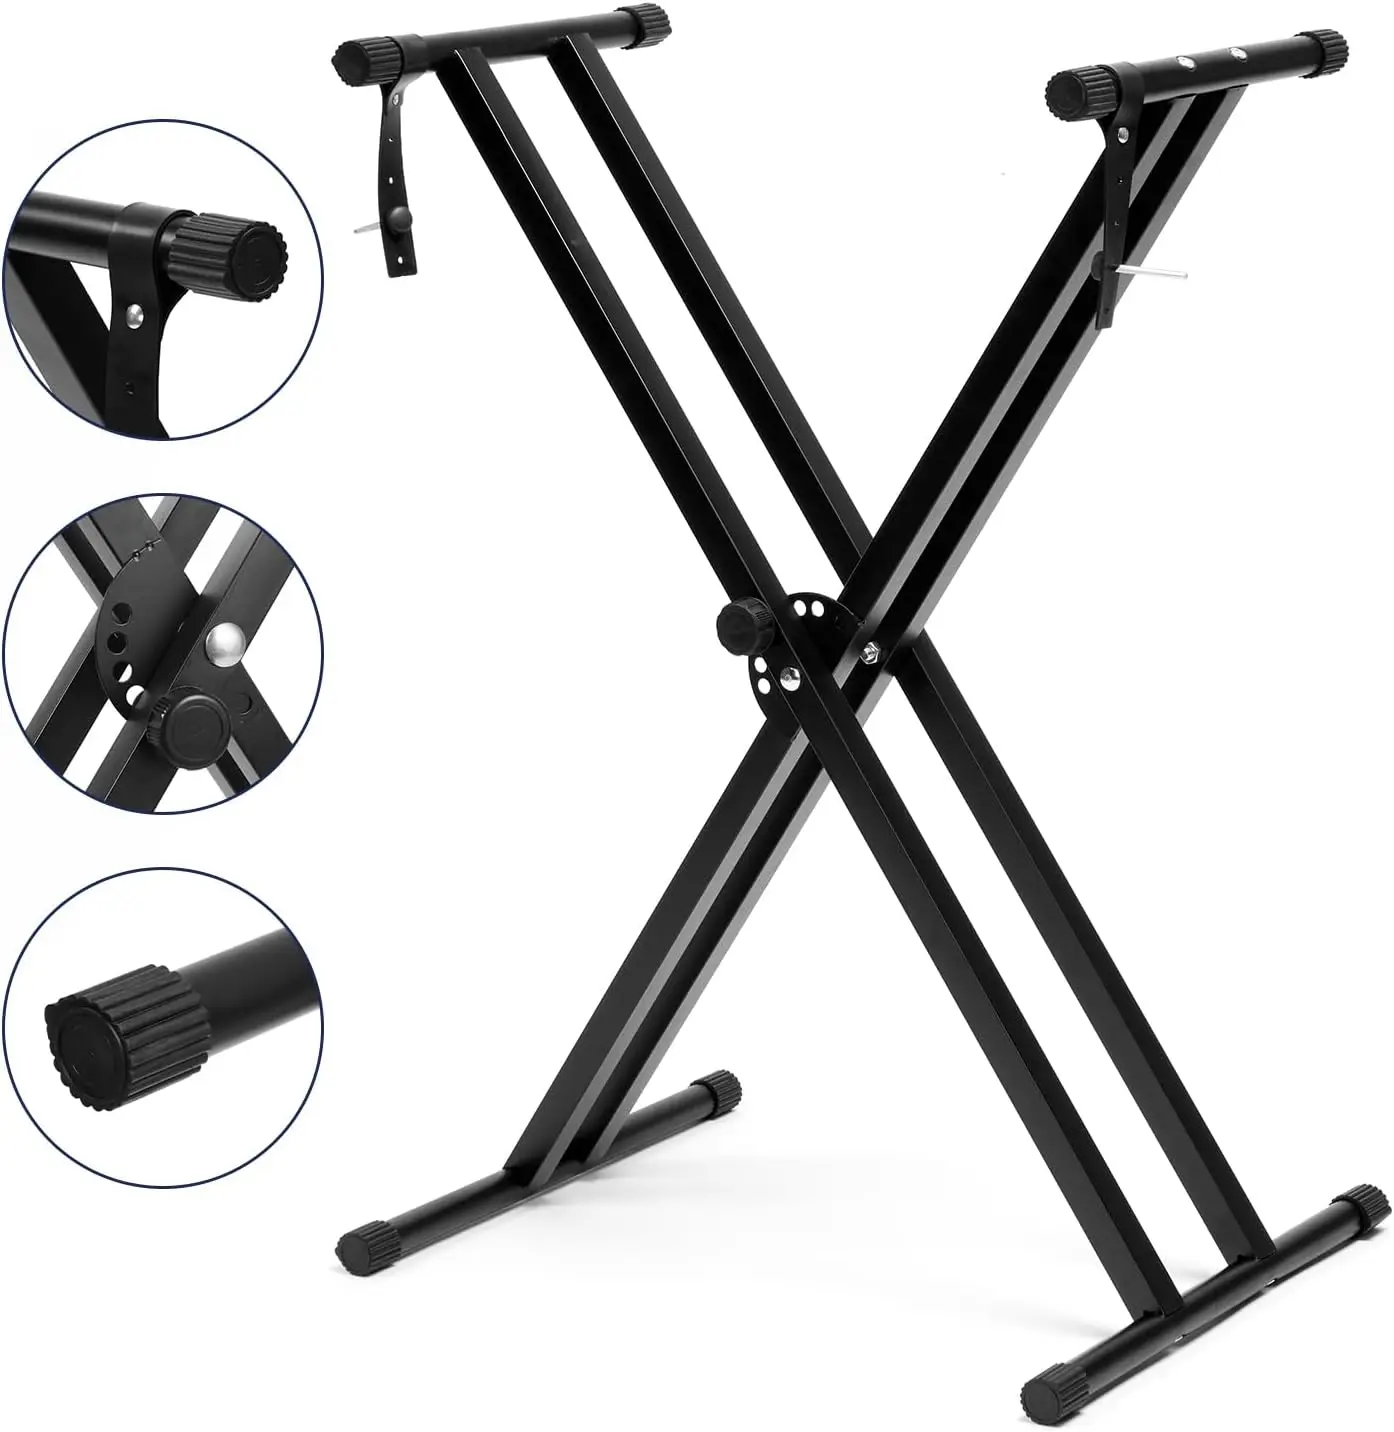 

Keyboard Stand Double X-Style,Keyboard Piano Stand with Locking Straps,Keyboard Stand Adjustable Width & Height for 54-88 Ke